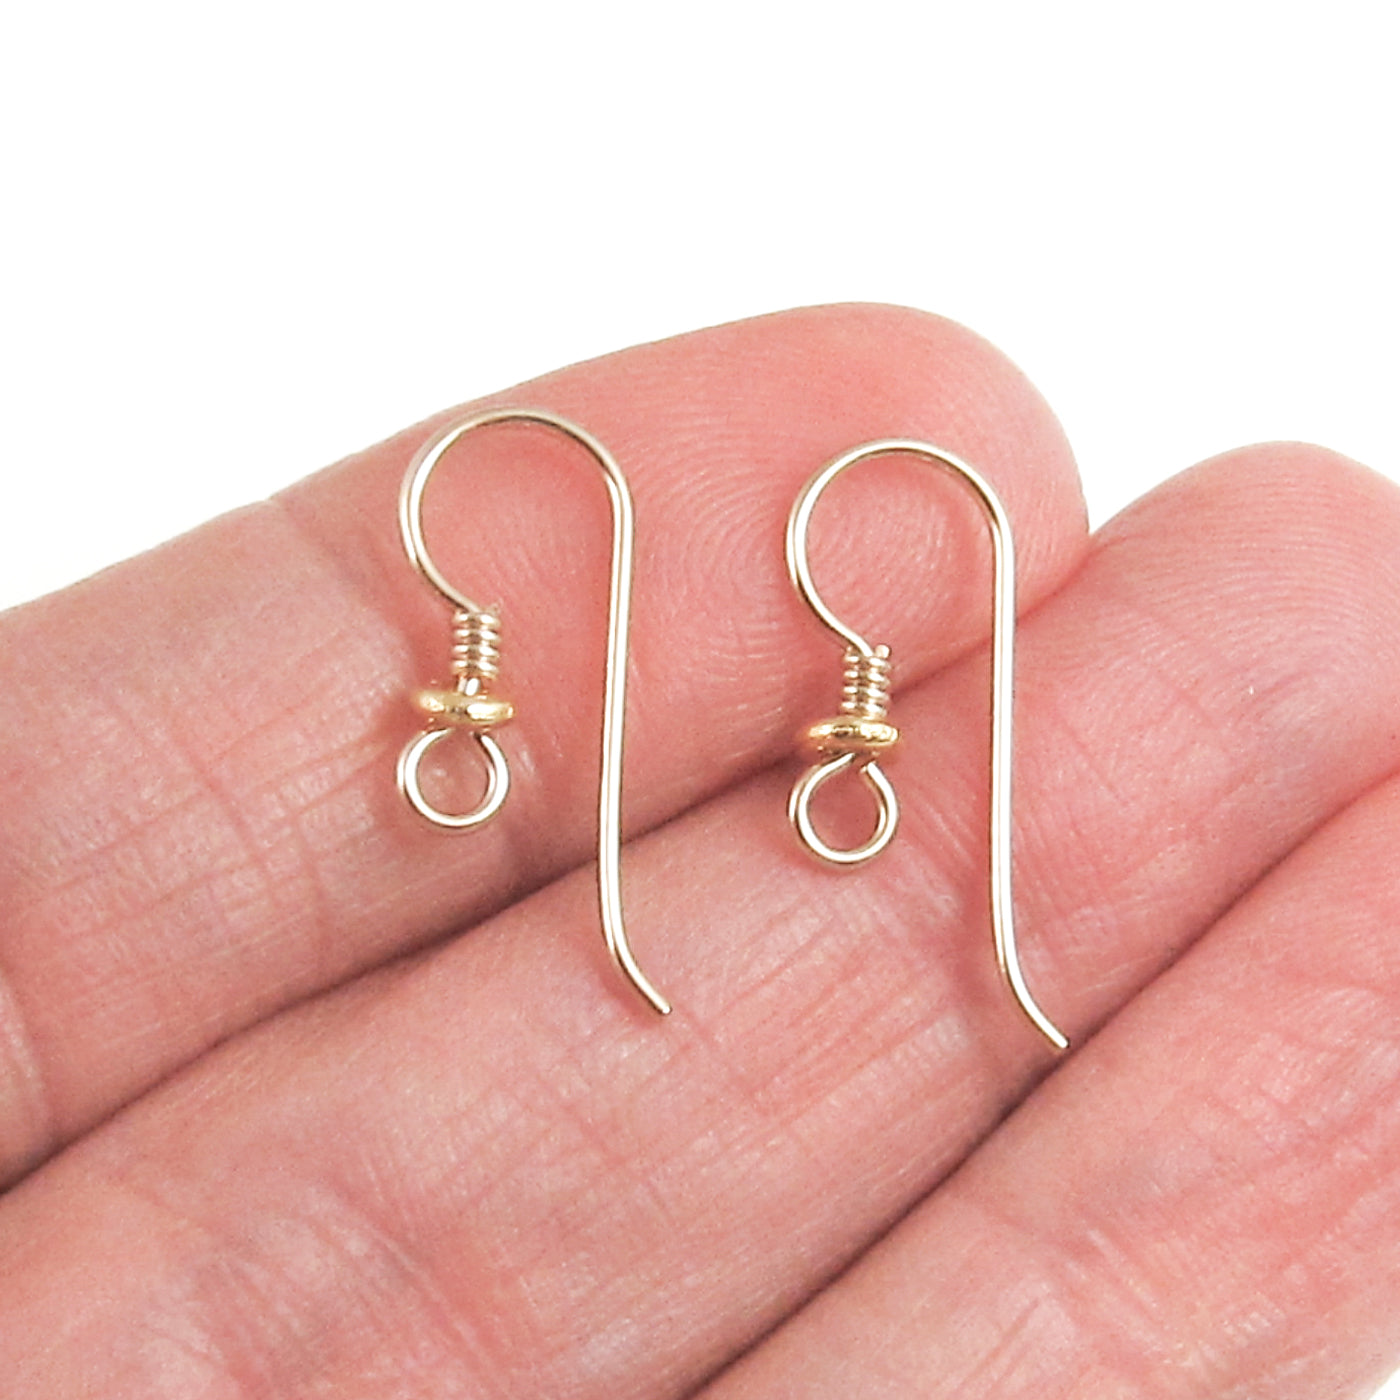 Pack: 3 pairs of gold ear wires & 2 pairs of silver ear wires